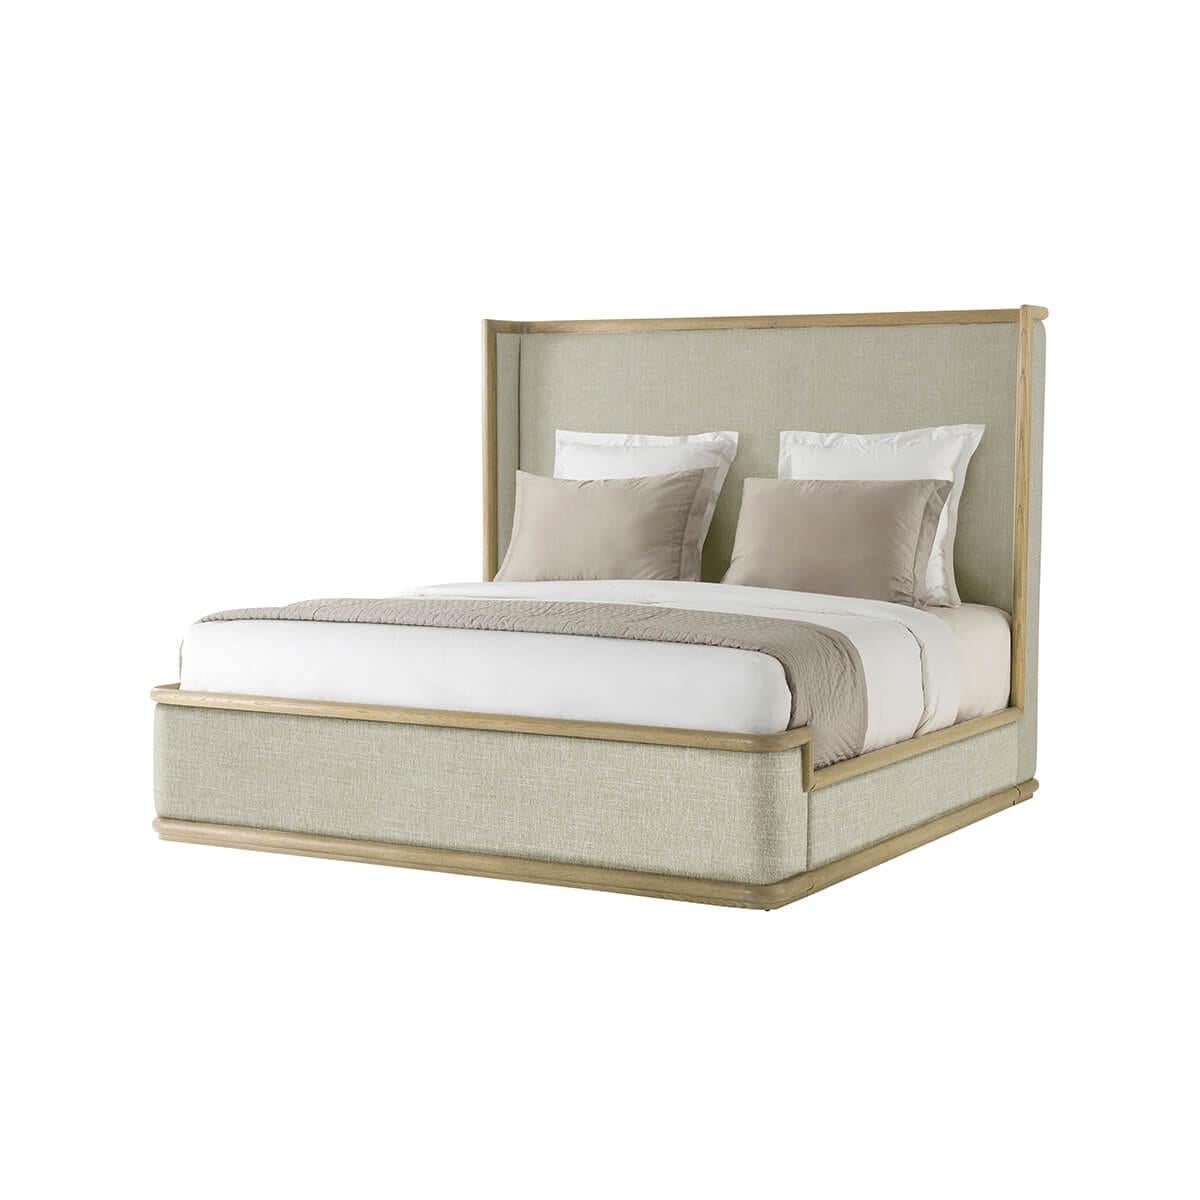 Modern Framed and Upholstered Bed - California King - Light Oak In New Condition For Sale In Westwood, NJ